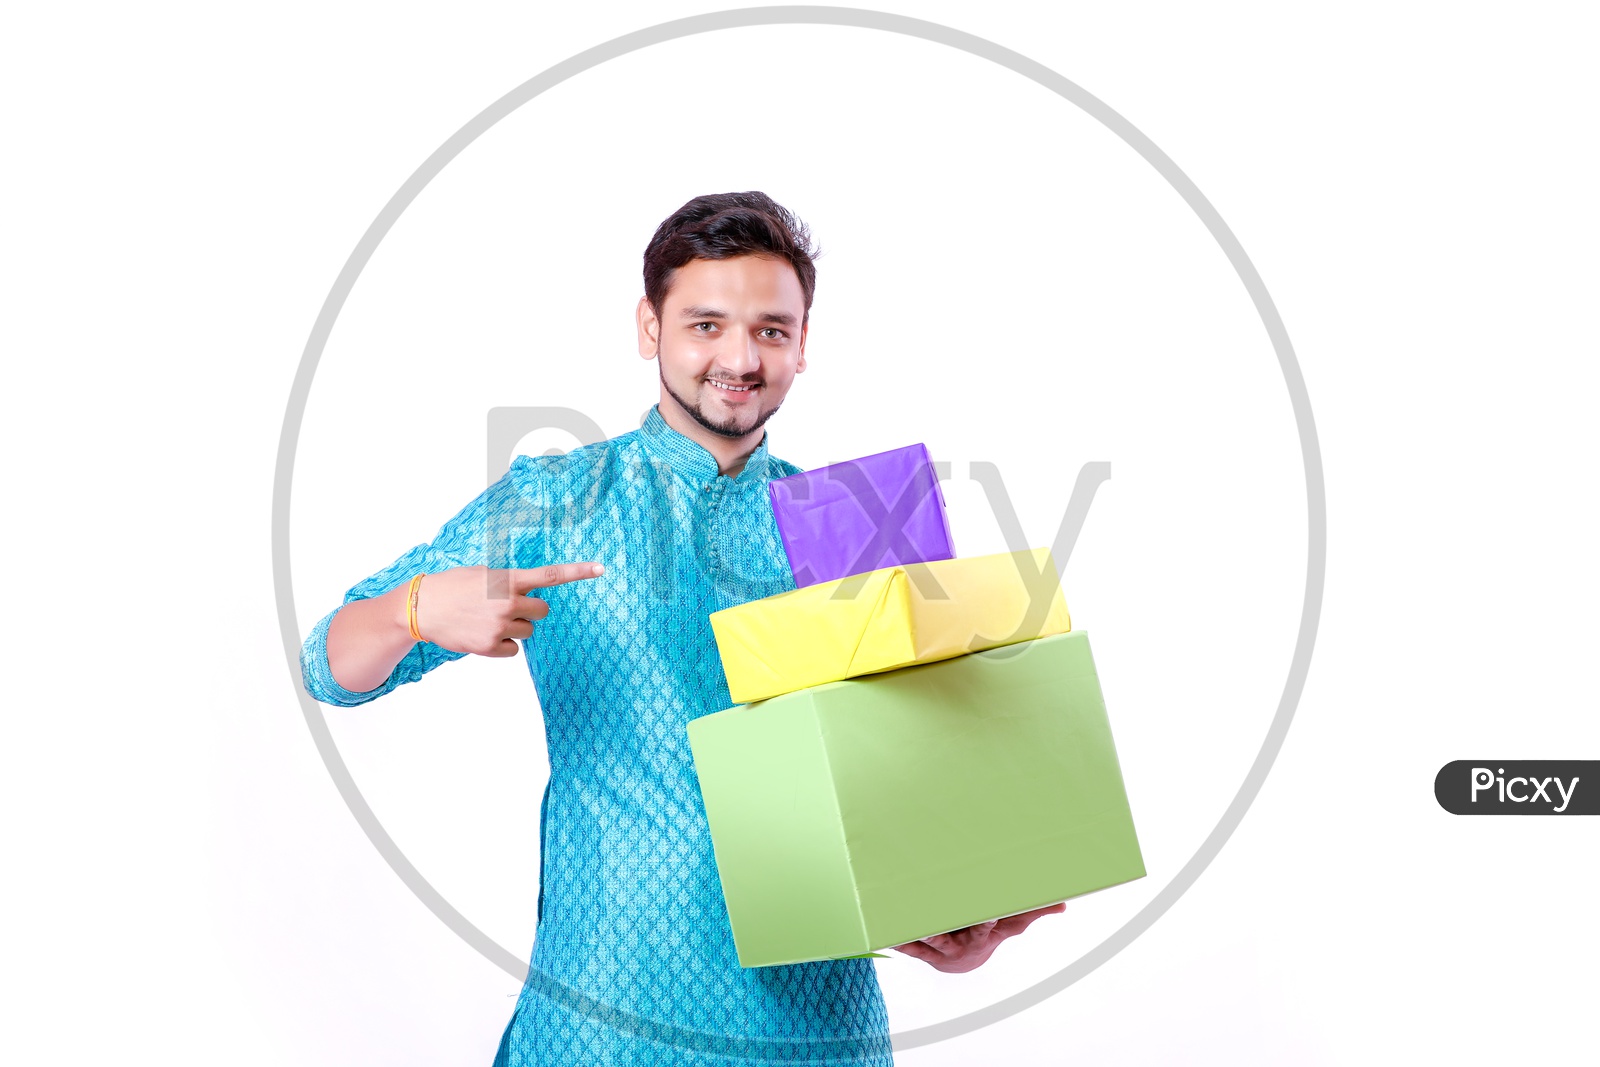 Portrait of a happy Indian Men pointing towards  gifts in hands  with white background